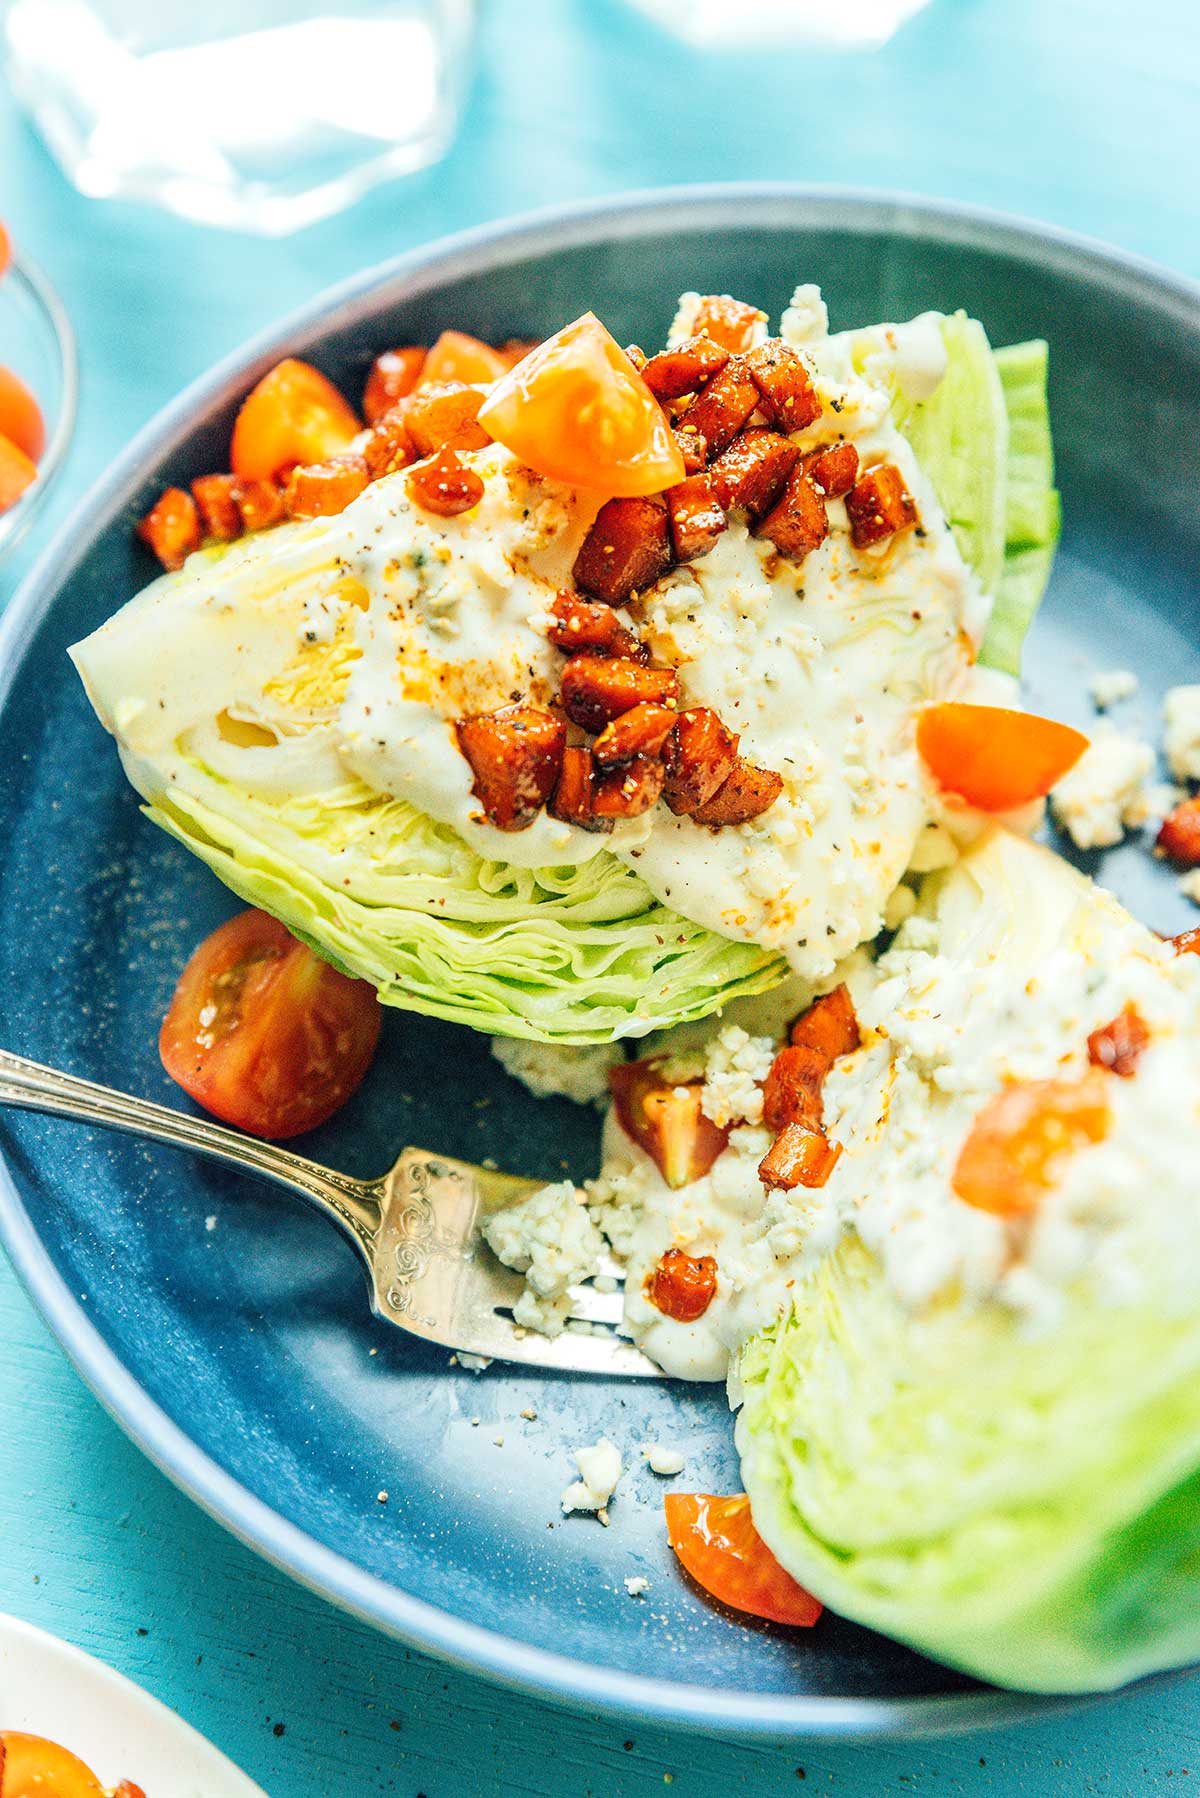 A close-up view detailing the texture and ingredients in vegetarian wedge salad